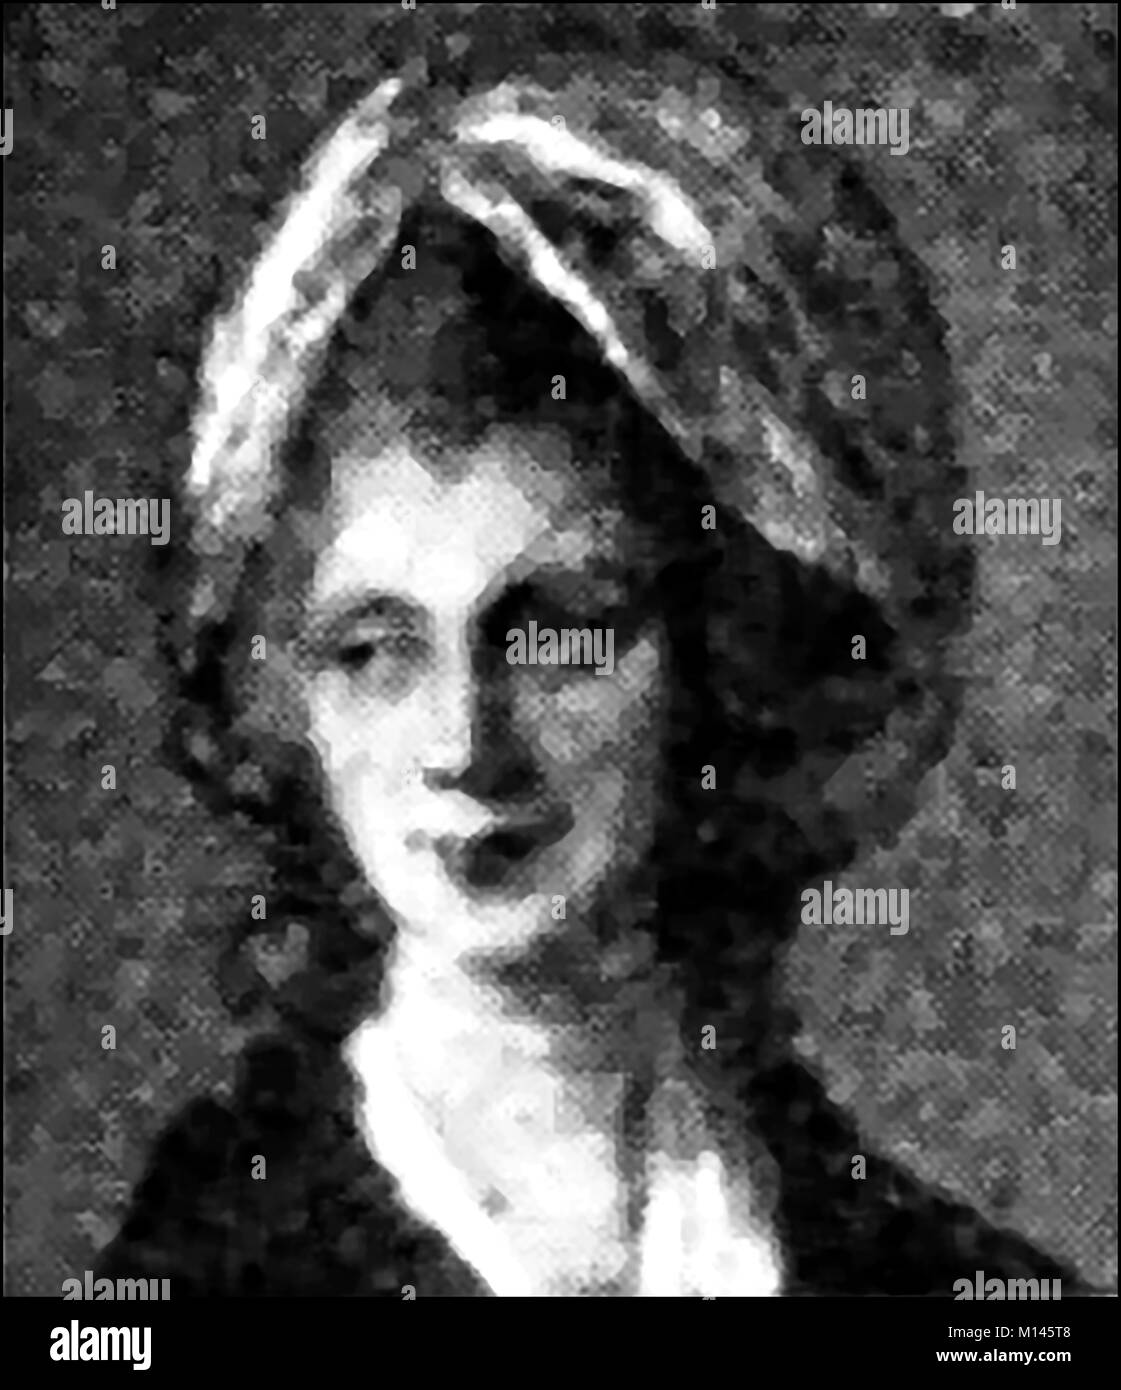 Queen Sophia Charlotte of Mecklenburg-Strelitz,(1744-1818)  wife of King George III of Britain & Ireland  and  Electress of Hanover  - a 1921 printed portrait - She was an amateur botanist who helped expand Kew gardens, London Stock Photo